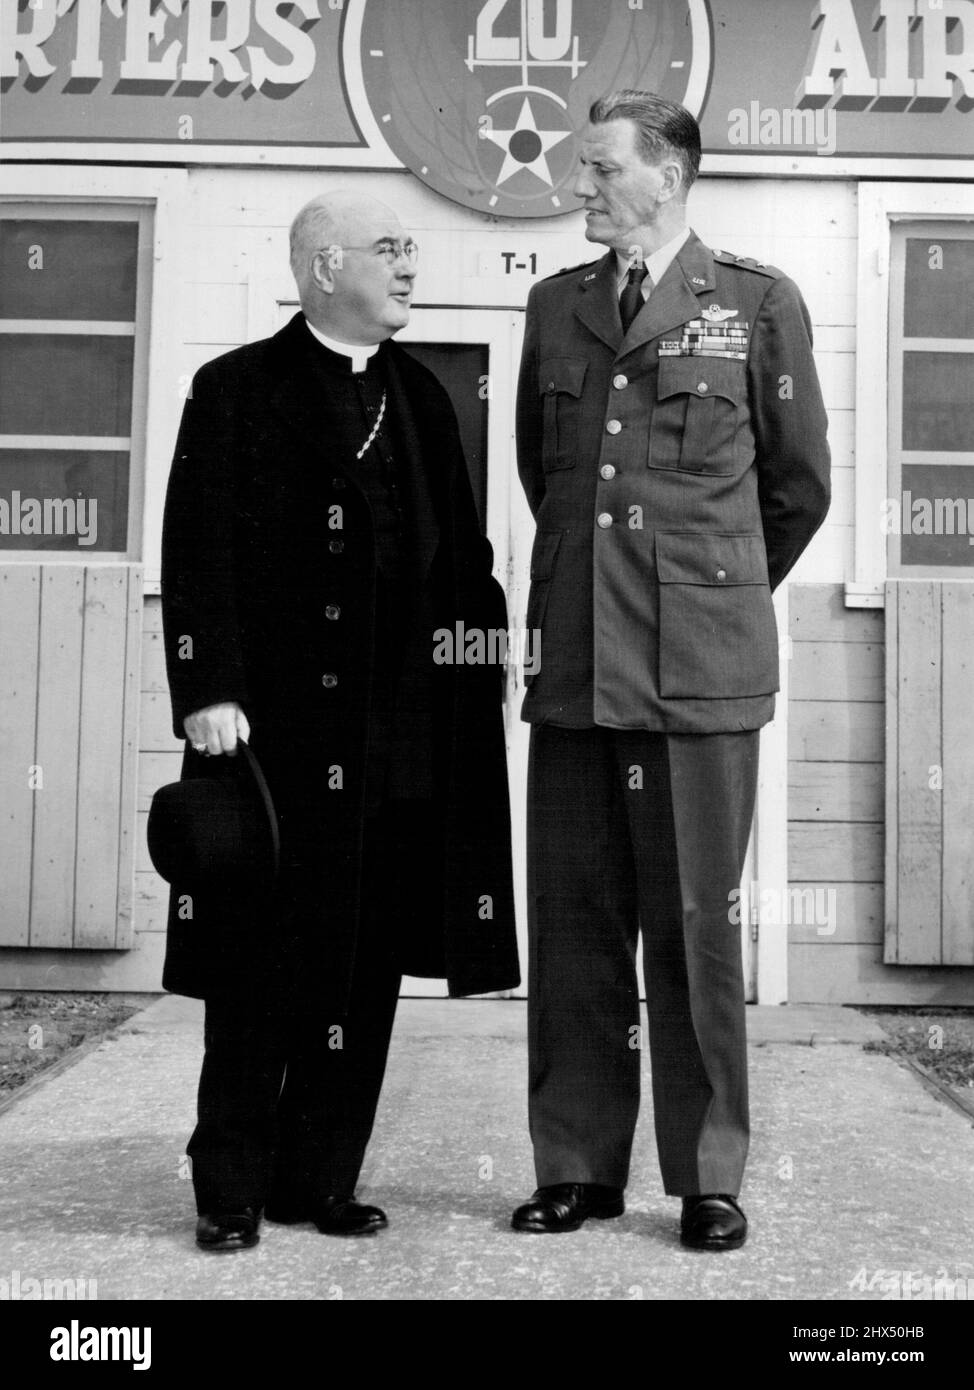 Varied Interests Discusses - Airpower and prayer power are the topics of conversation as his Eminence Francis Cardinal Spellman confers with Maj. Gen. Ralph F. Stearley outside the Okinawa headquarters of the Twentieth Air Force. Military vicar for the armed forces, Cardinal Spellman spent a day talking with combat personnel throughout the island. January 07, 1952. (Photo by USAF Photo). Stock Photo